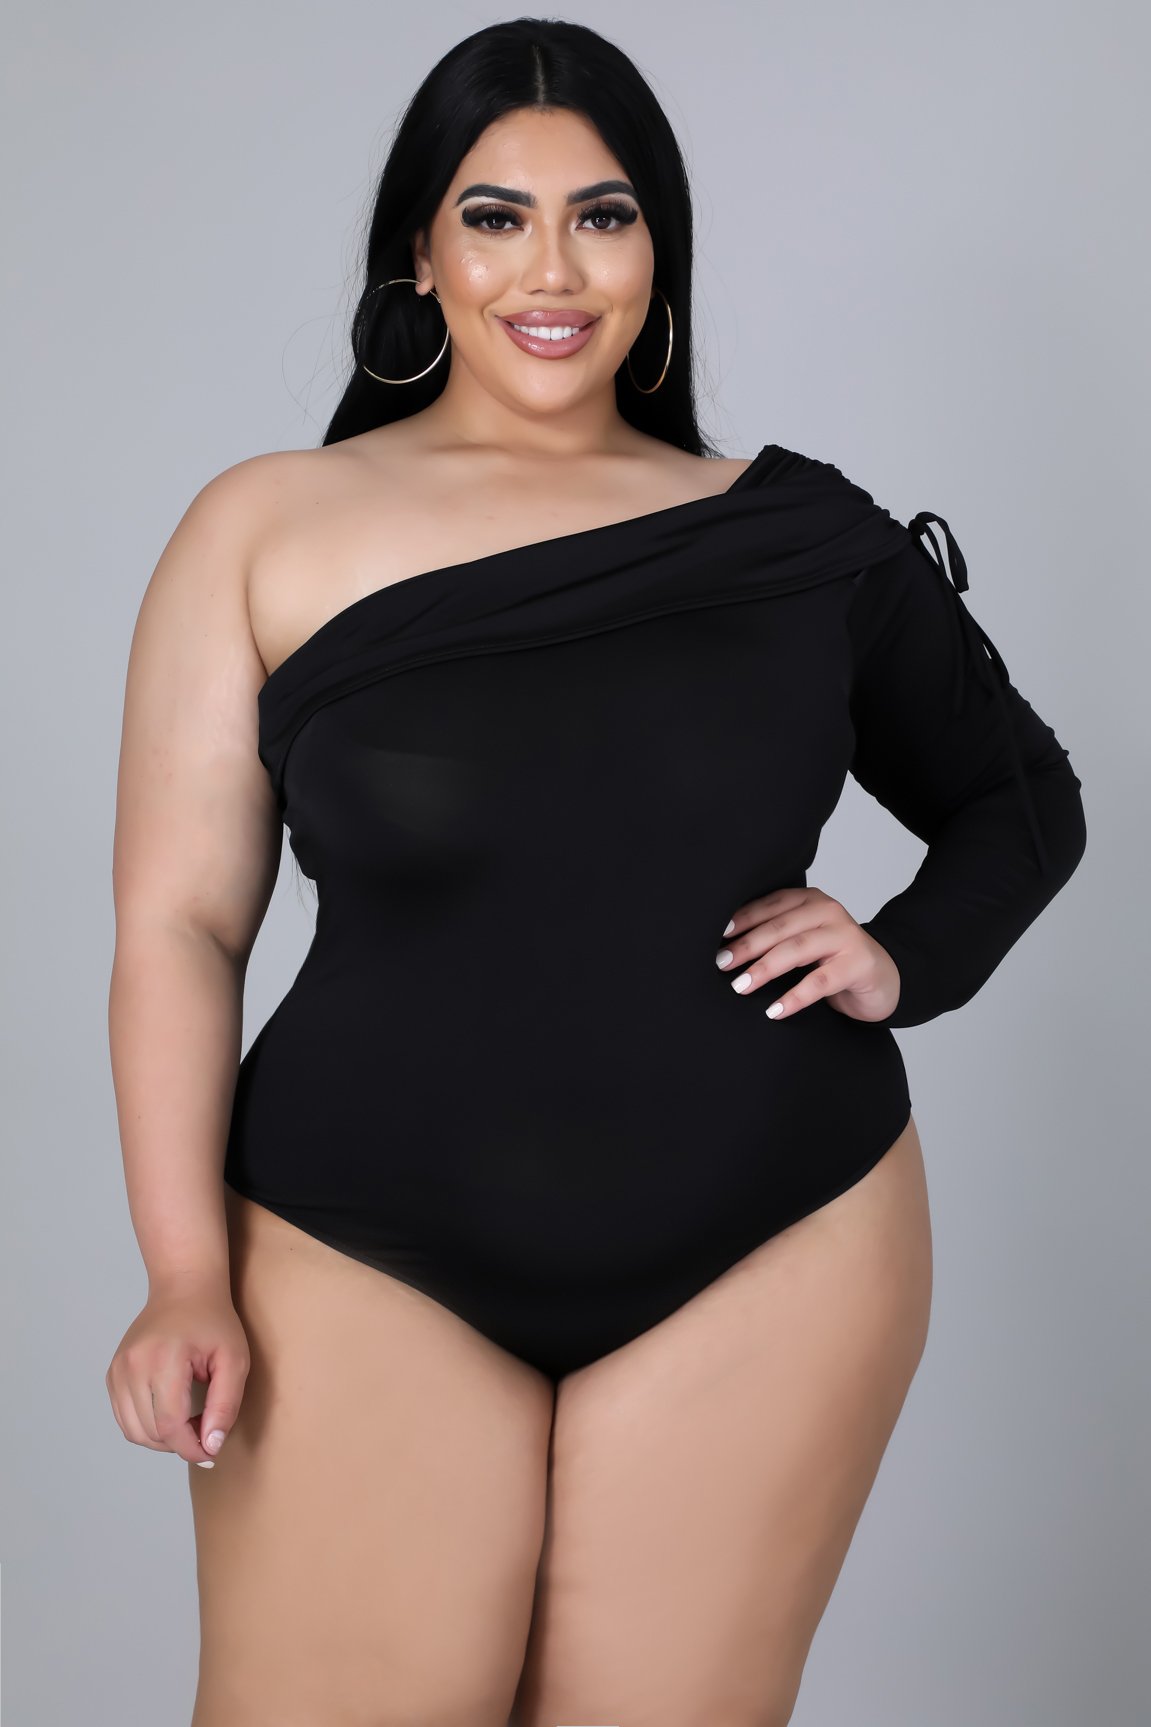  Long Sleeve Body Suits For Womens Black Plus Size